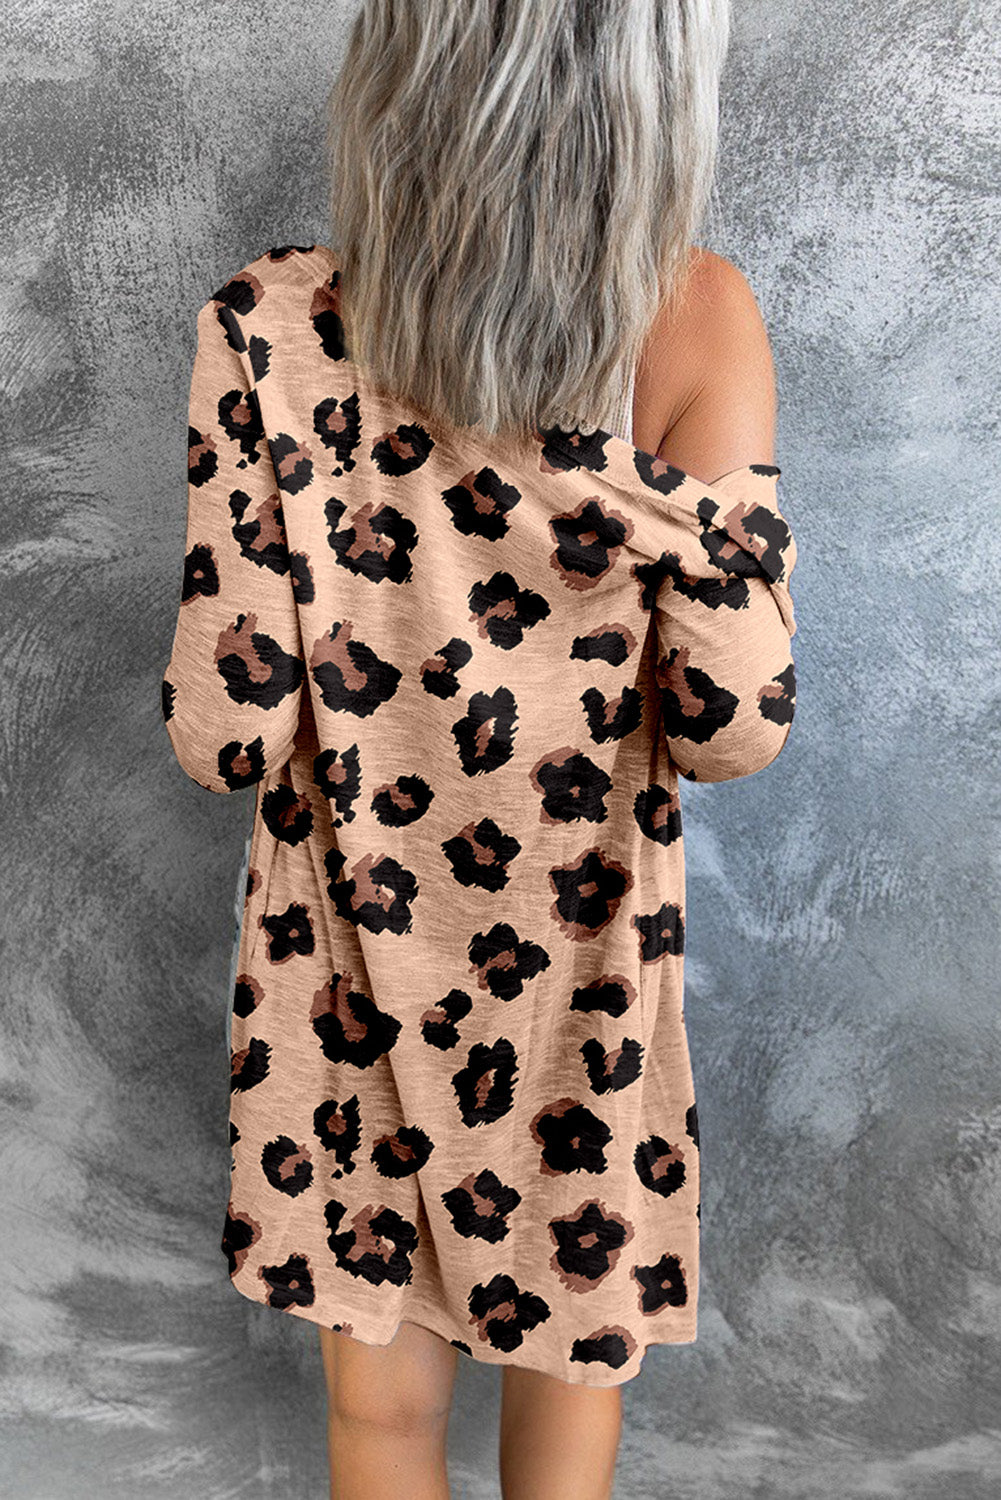 LC2541932-20-S, LC2541932-20-M, LC2541932-20-L, LC2541932-20-XL, LC2541932-20-2XL, Leopard Printed Open Front Cardigan 